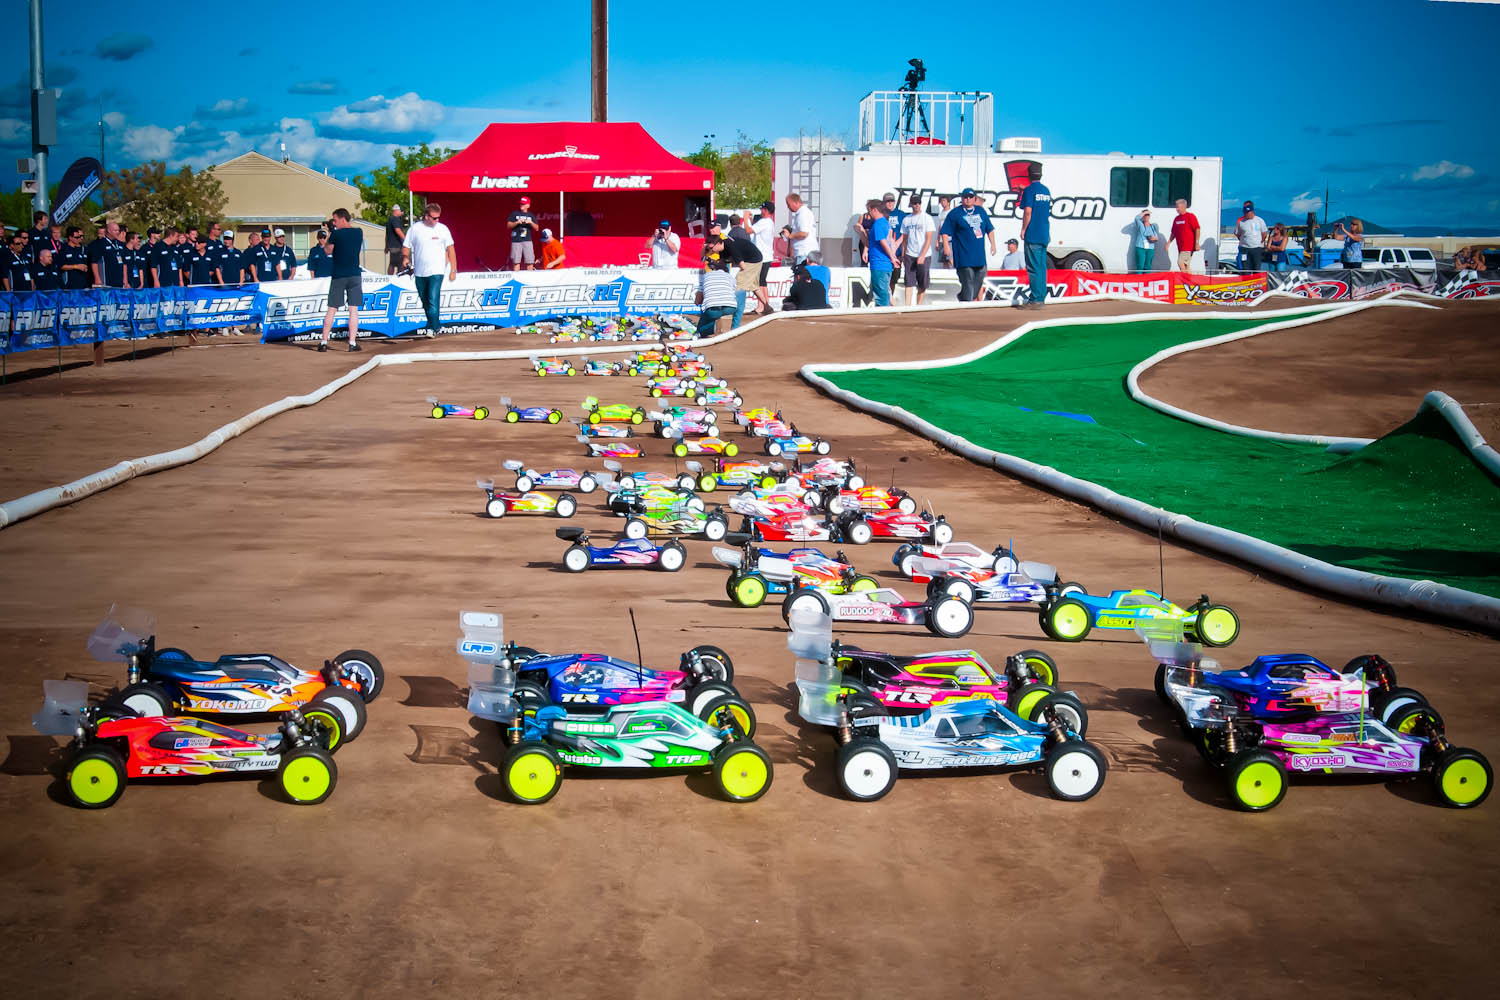 RC Car Action - RC Cars & Trucks | IFMAR 2013 Worlds